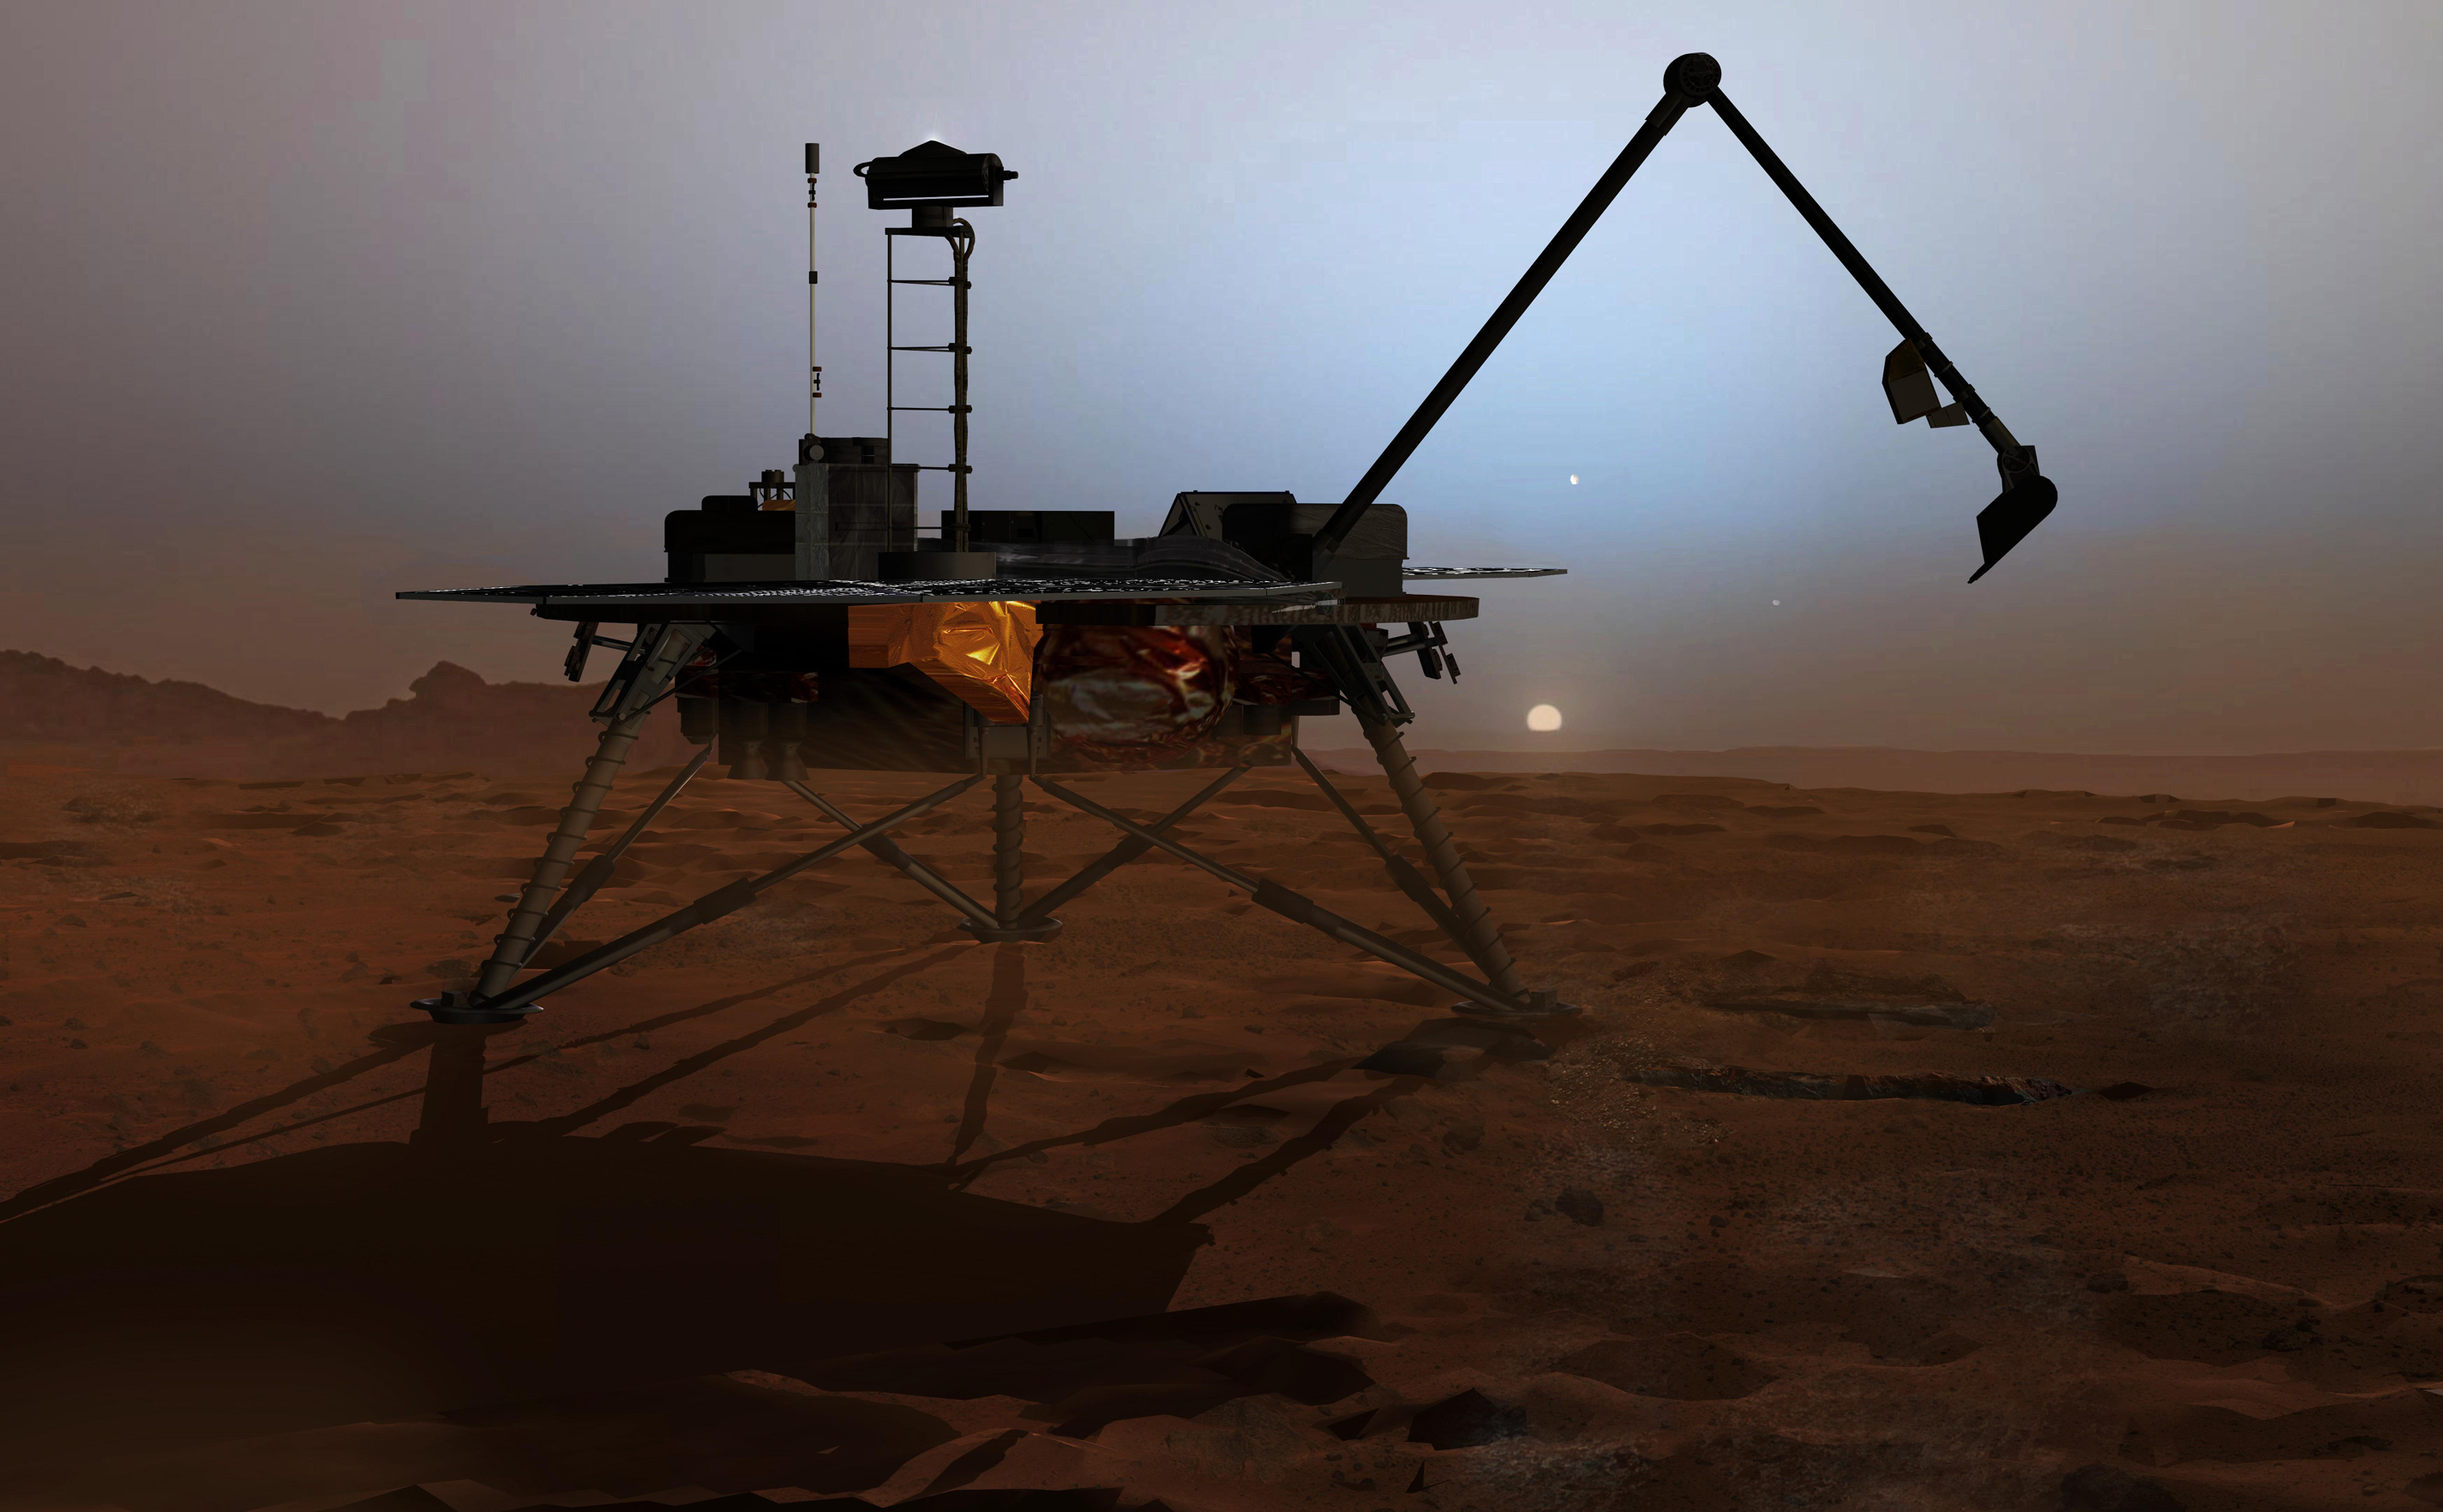 A surprise from NASA's Phoenix Mars Lander mission in 2008 was finding perchlorate in Martian soil.